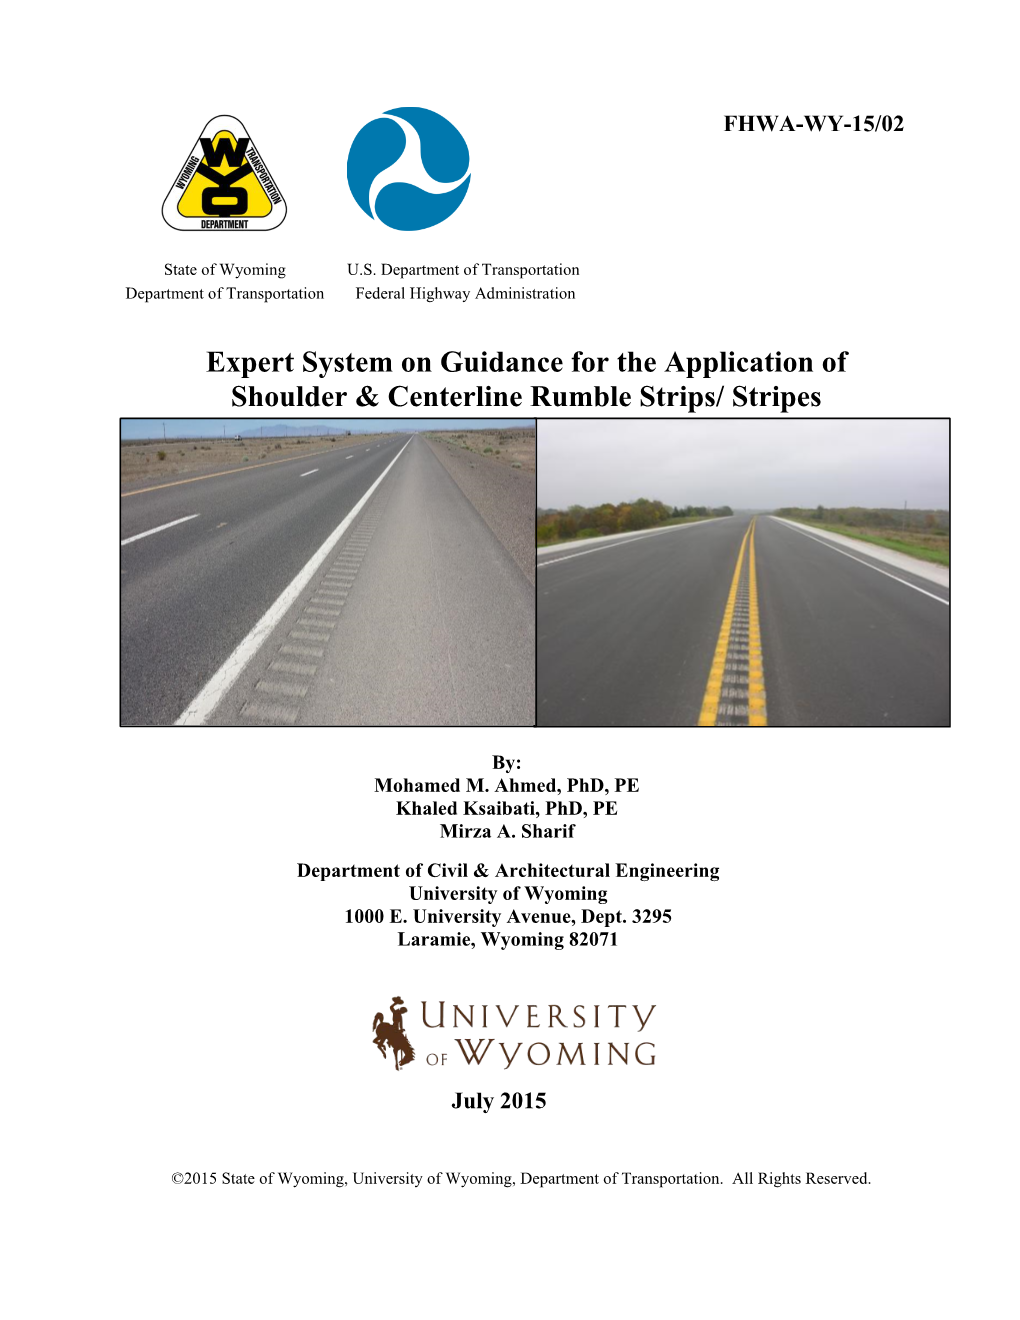 Expert System on Guidance for the Application of Shoulder & Centerline Rumble Strips